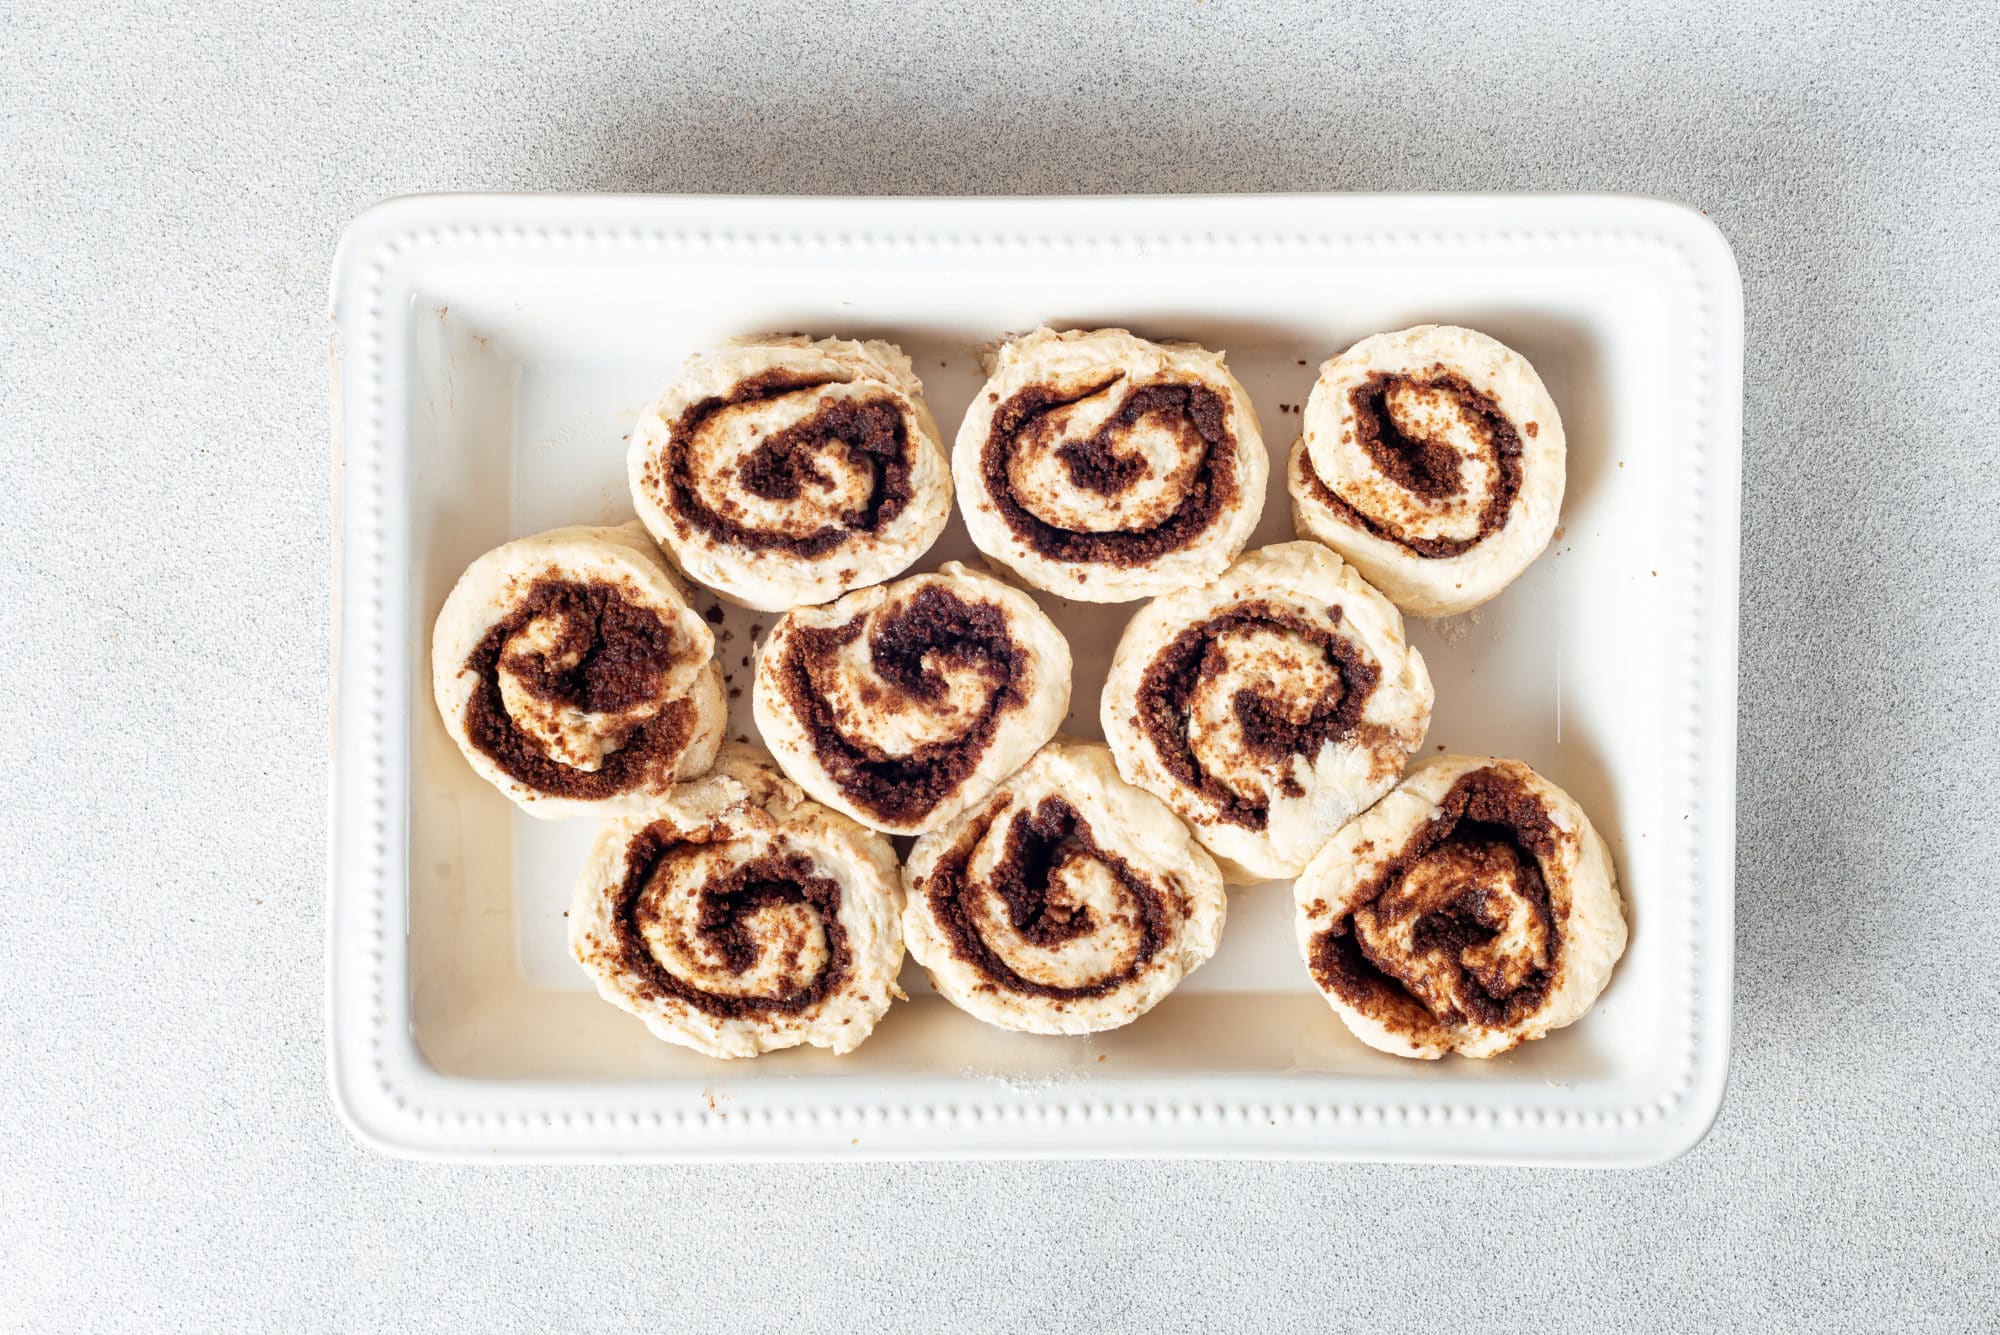 Cinnamon roll dough ready to bake in a white baking tray.